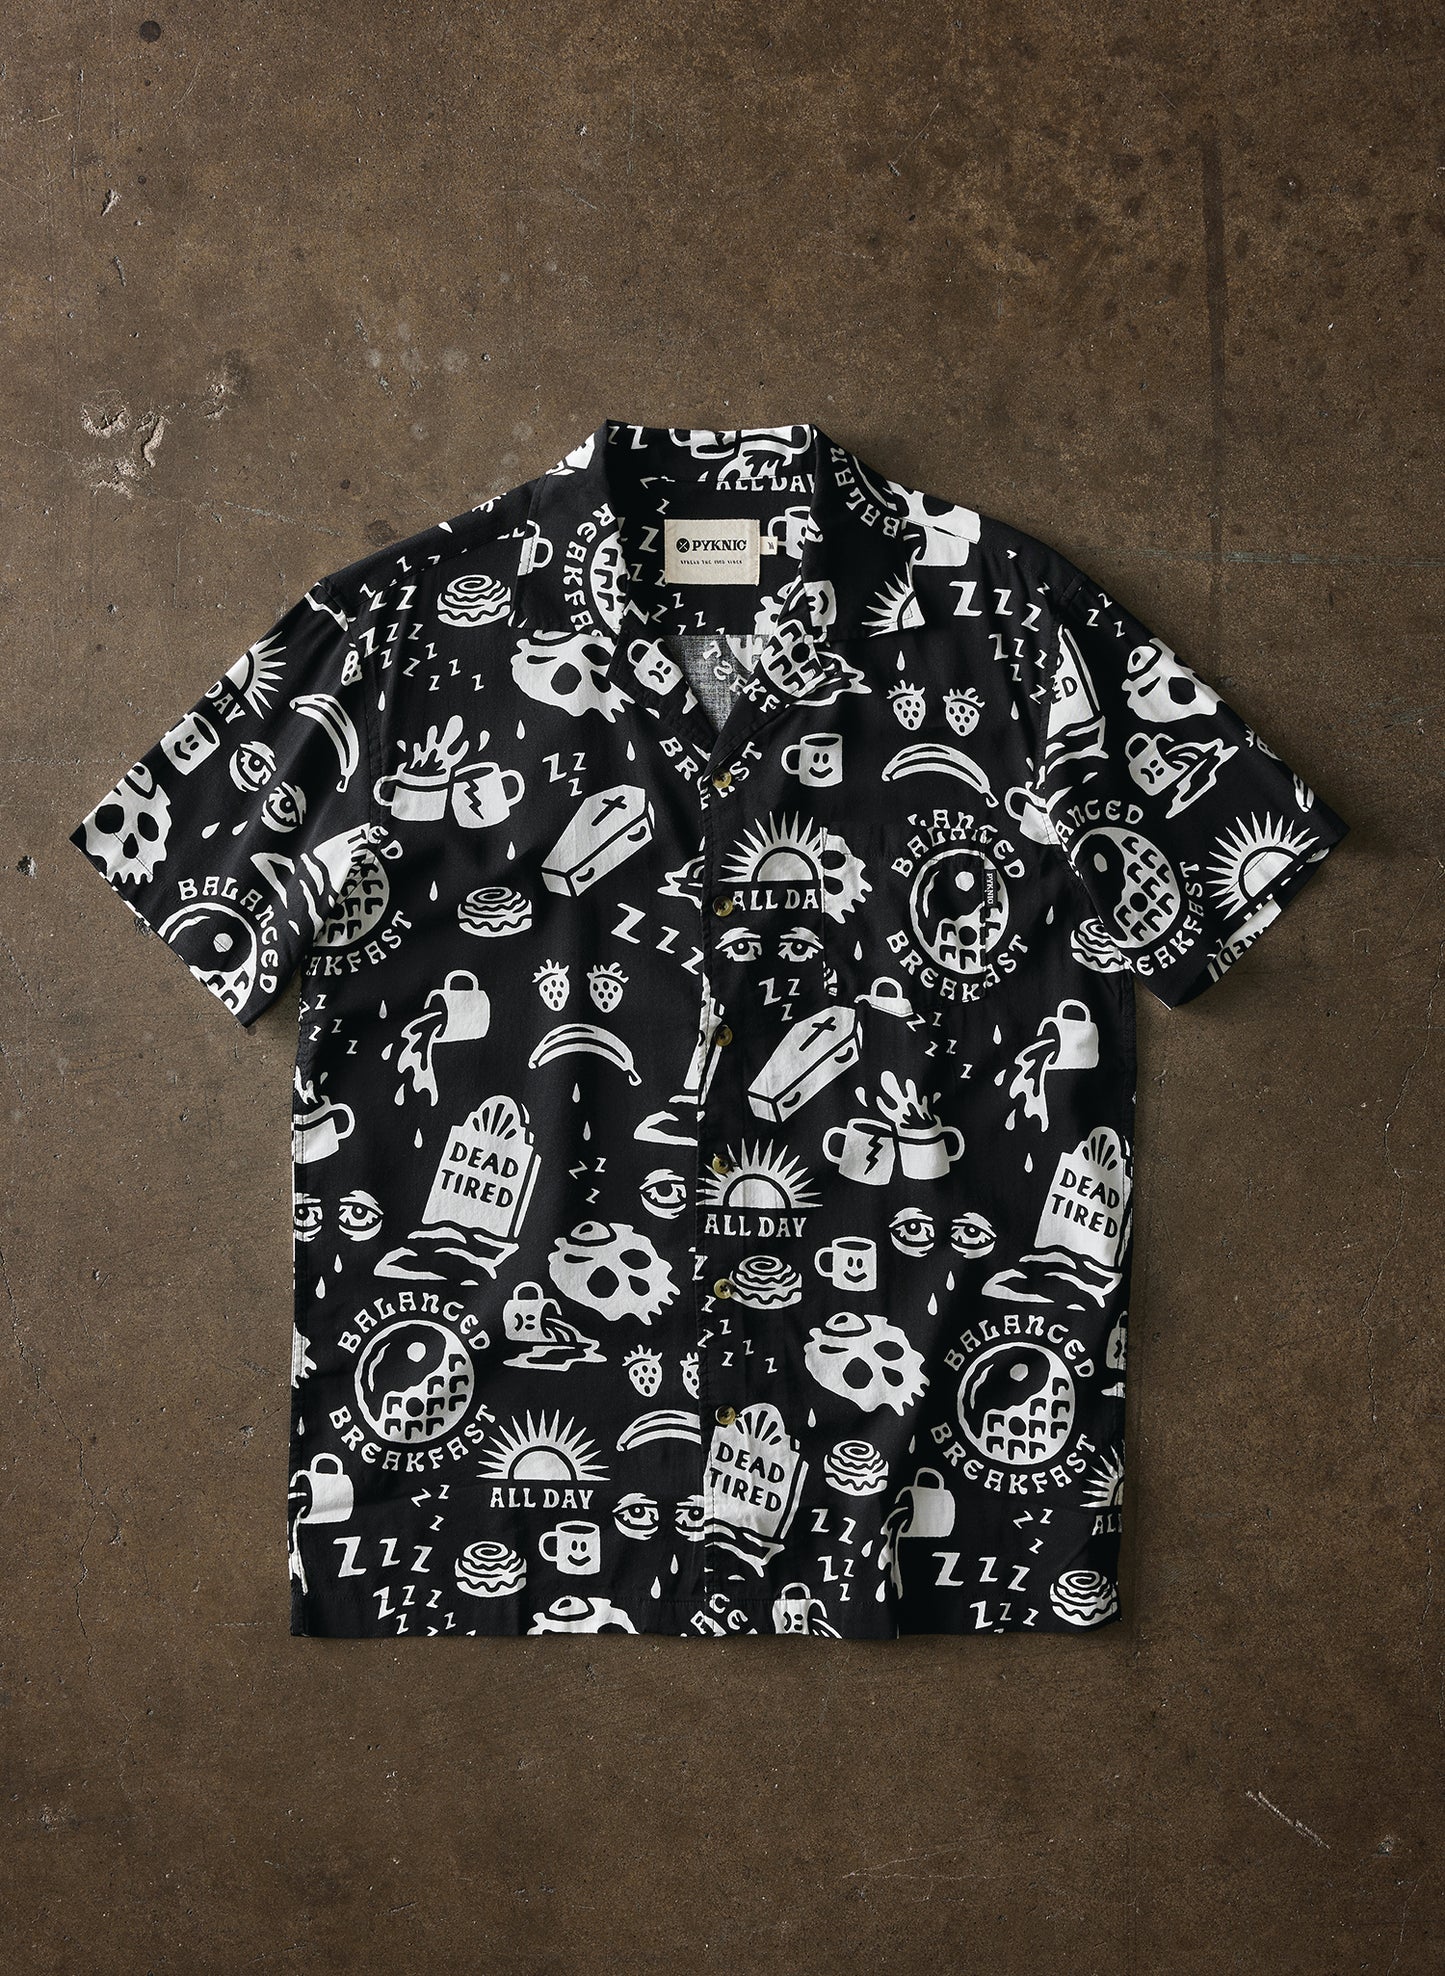 Pyknic | Dead Tired Vacation Casual Button-Up Shirt | Button Down Shirt with All Over Graphic Print, Black Coffee Shirt, Breakfast Lover Shirt,Best Foodie Shirt, Best Foodie Gift, Food Themed Apparel, Food Tattoo Flash, Always Tired Button Down Shirt, Cool Button Up Shirts